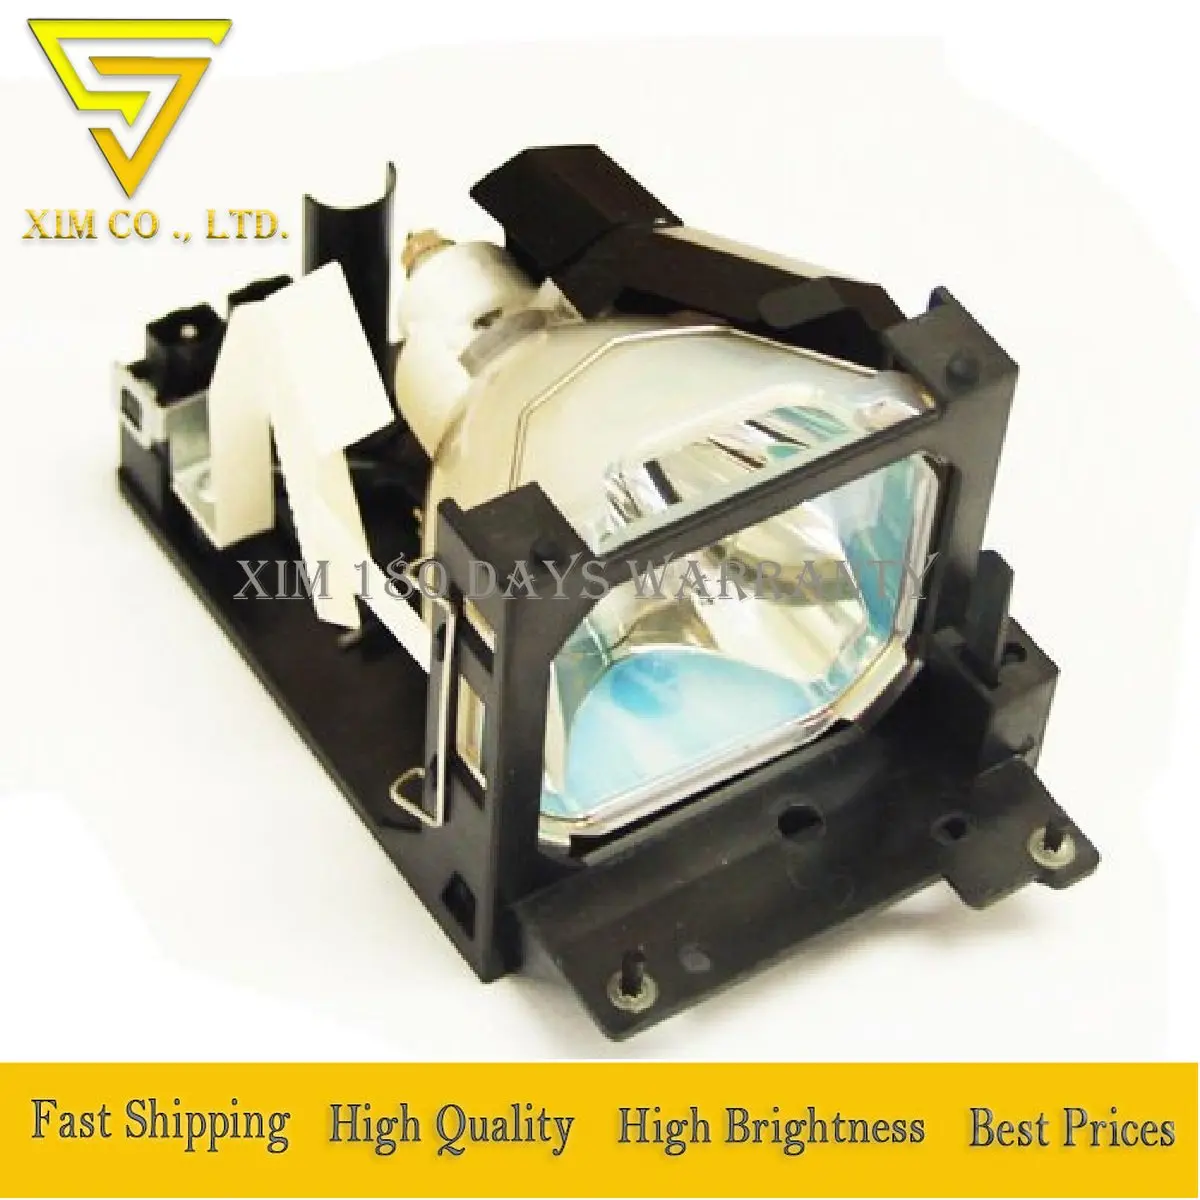 CTLAMP Premium Quality DT00471 Replacement Lamp DT00471 Compatible Bulb with Housing Compatible with HITACHI CP-HX2080 CP-S420 CP-S420W CP-S420WA CP-X430 MC-X2500 MVP-X12 SRP-2600 CP-X430W CP-X430WA 